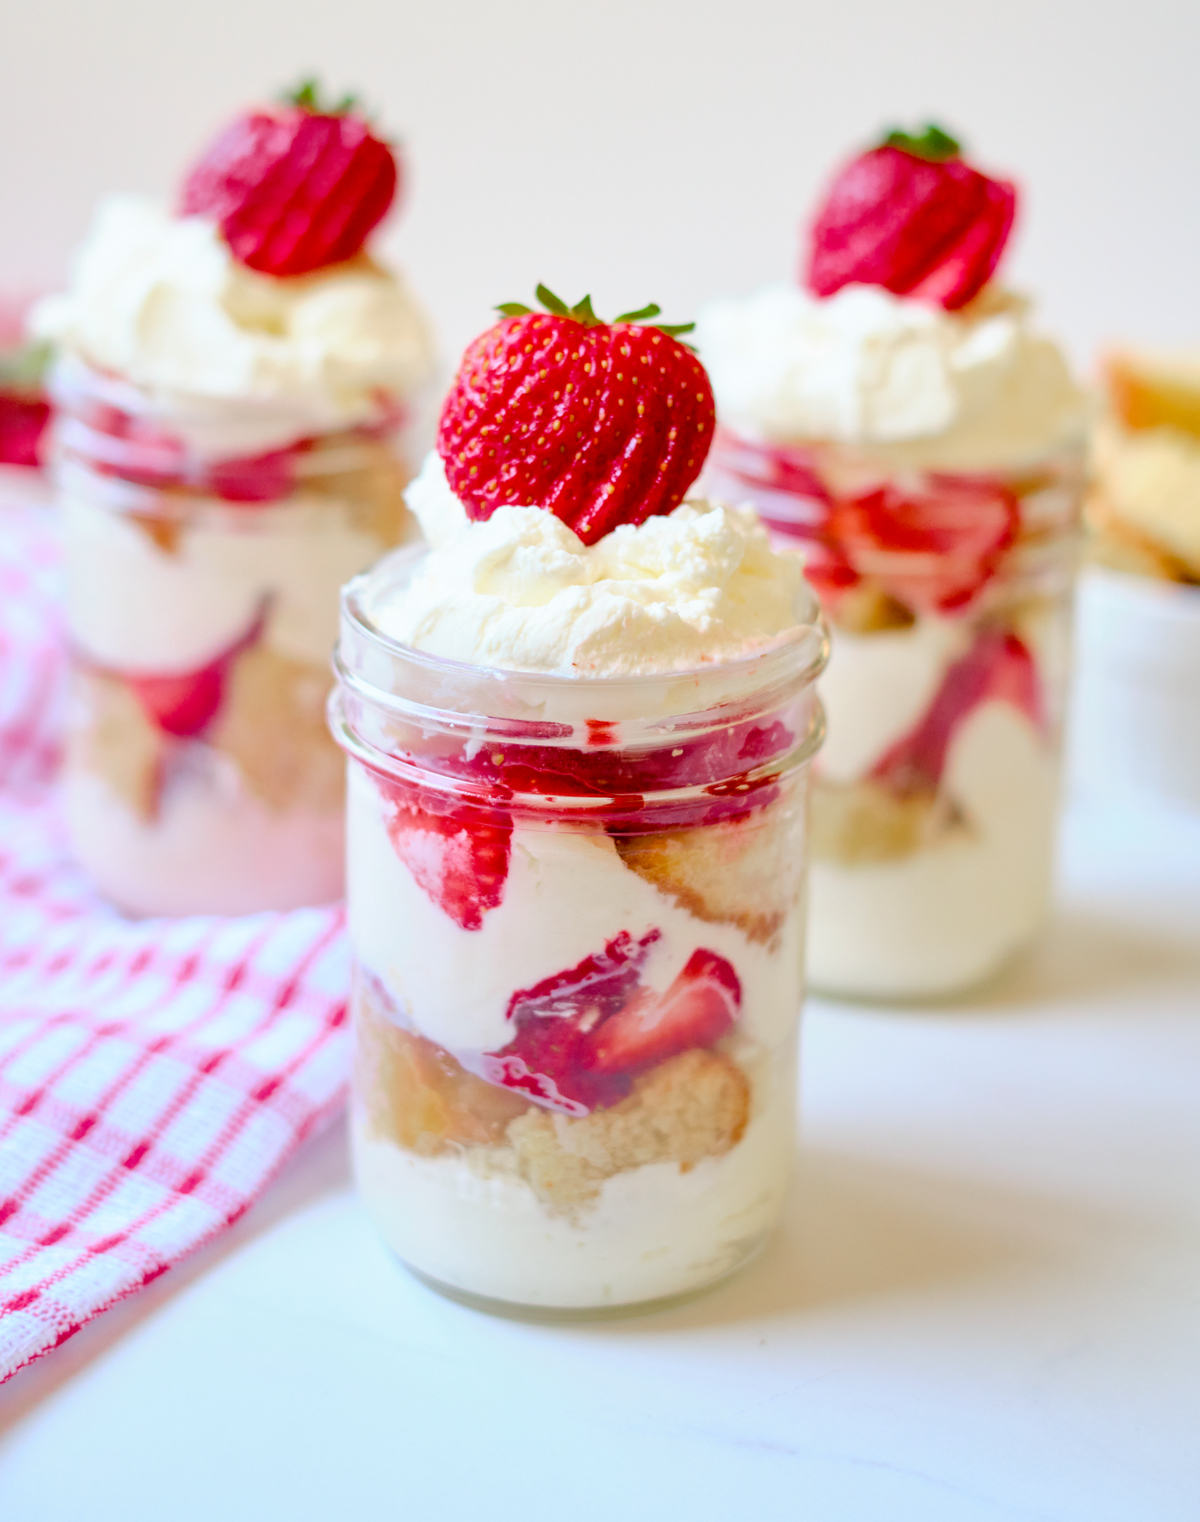 Can I Make These in Advance? You can make the cake one to two days ahead of time (if it gets a little dry, don’t worry! The whipped cream and fresh strawberries will moisten the cake again). However, I’d wait to assemble the strawberry trifles until the day of, otherwise they’ll become soggy. Tips for the Best Strawberry Shortcake Trifles If you don’t have a cookie or biscuit cutter, simply cut out the cake layers with the top of the jar. Frozen strawberries can’t be used in this recipe. They’re too soggy and the flavor isn’t as good! For a less sweet treat, scale back on the amount of sugar in the whipped cream.